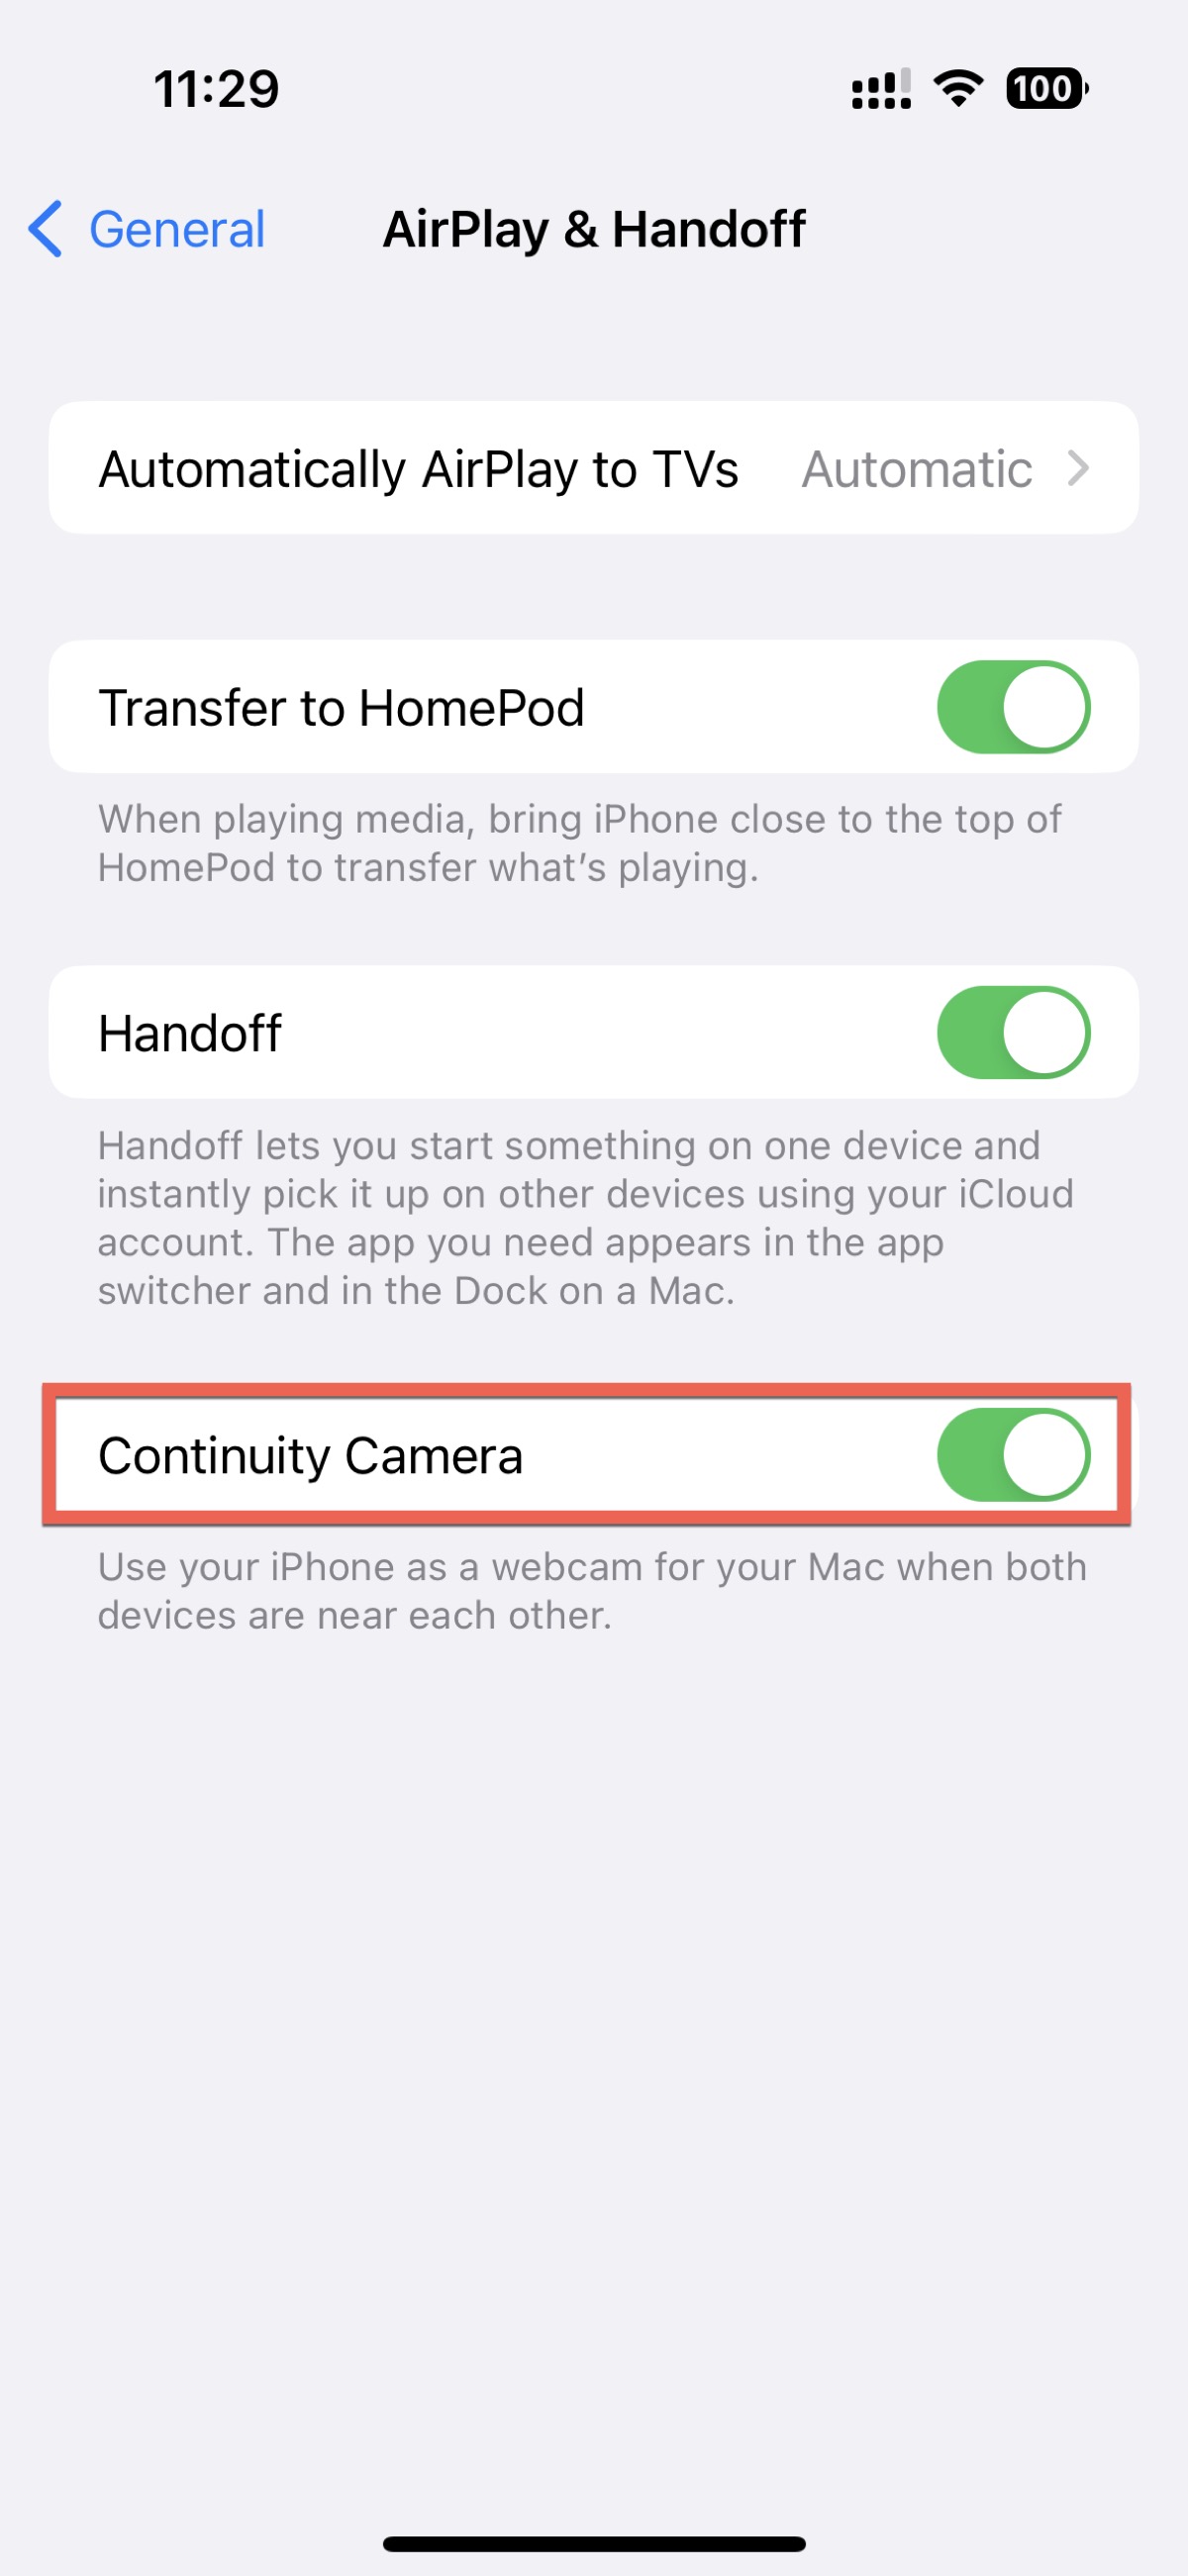 Enable Continuity Camera on your iPhone